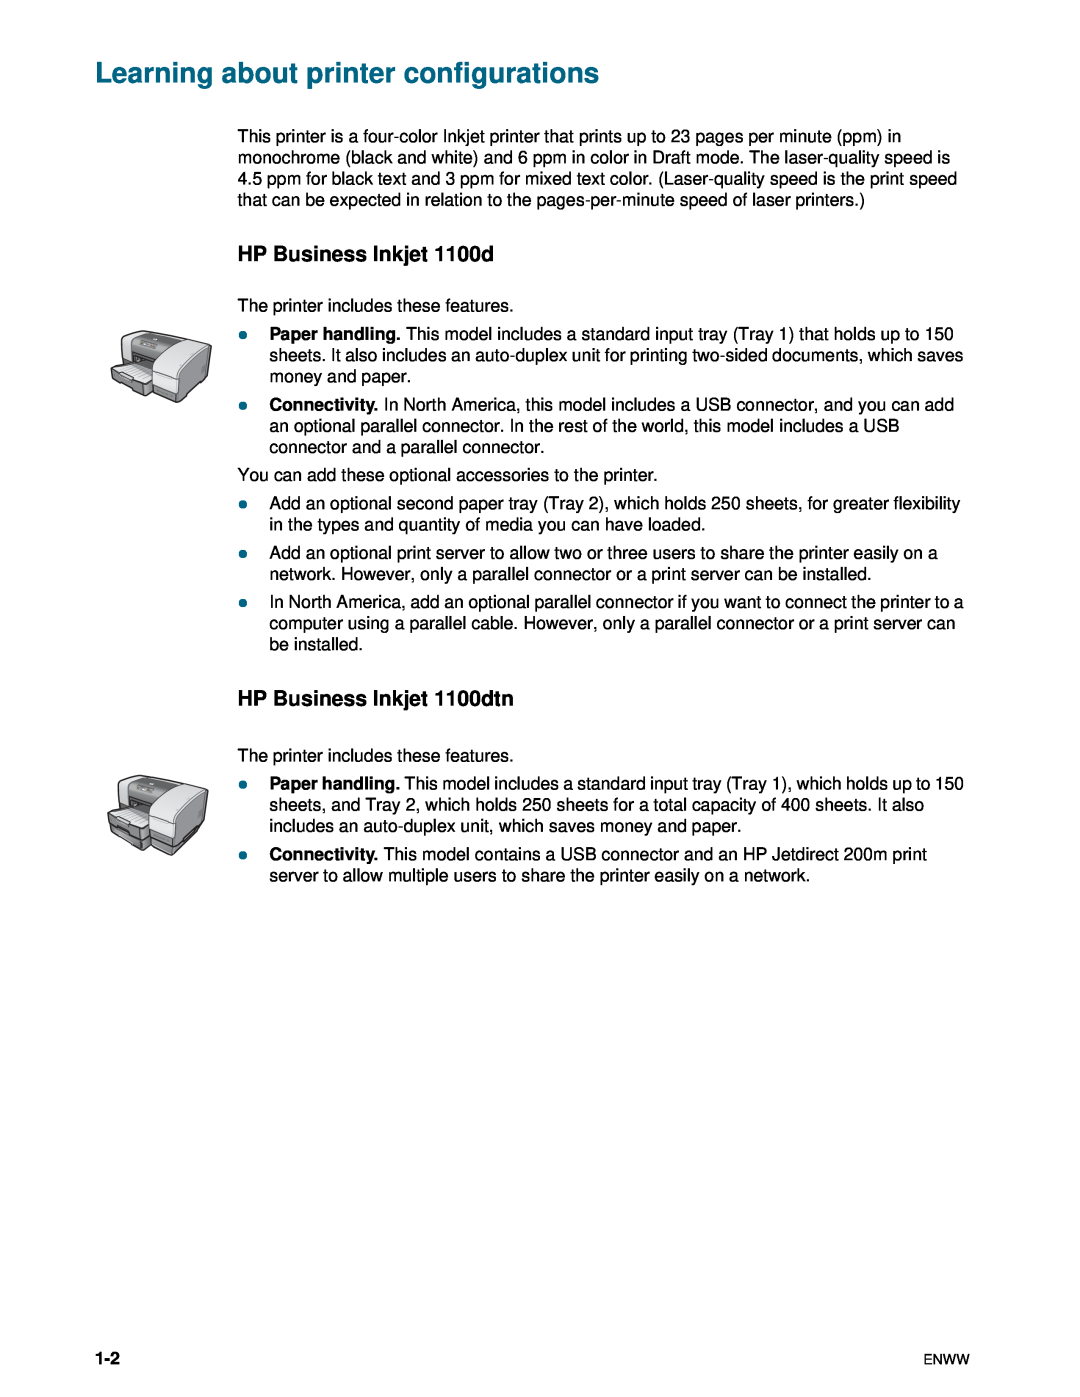 HP manual Learning about printer configurations, HP Business Inkjet 1100dtn 